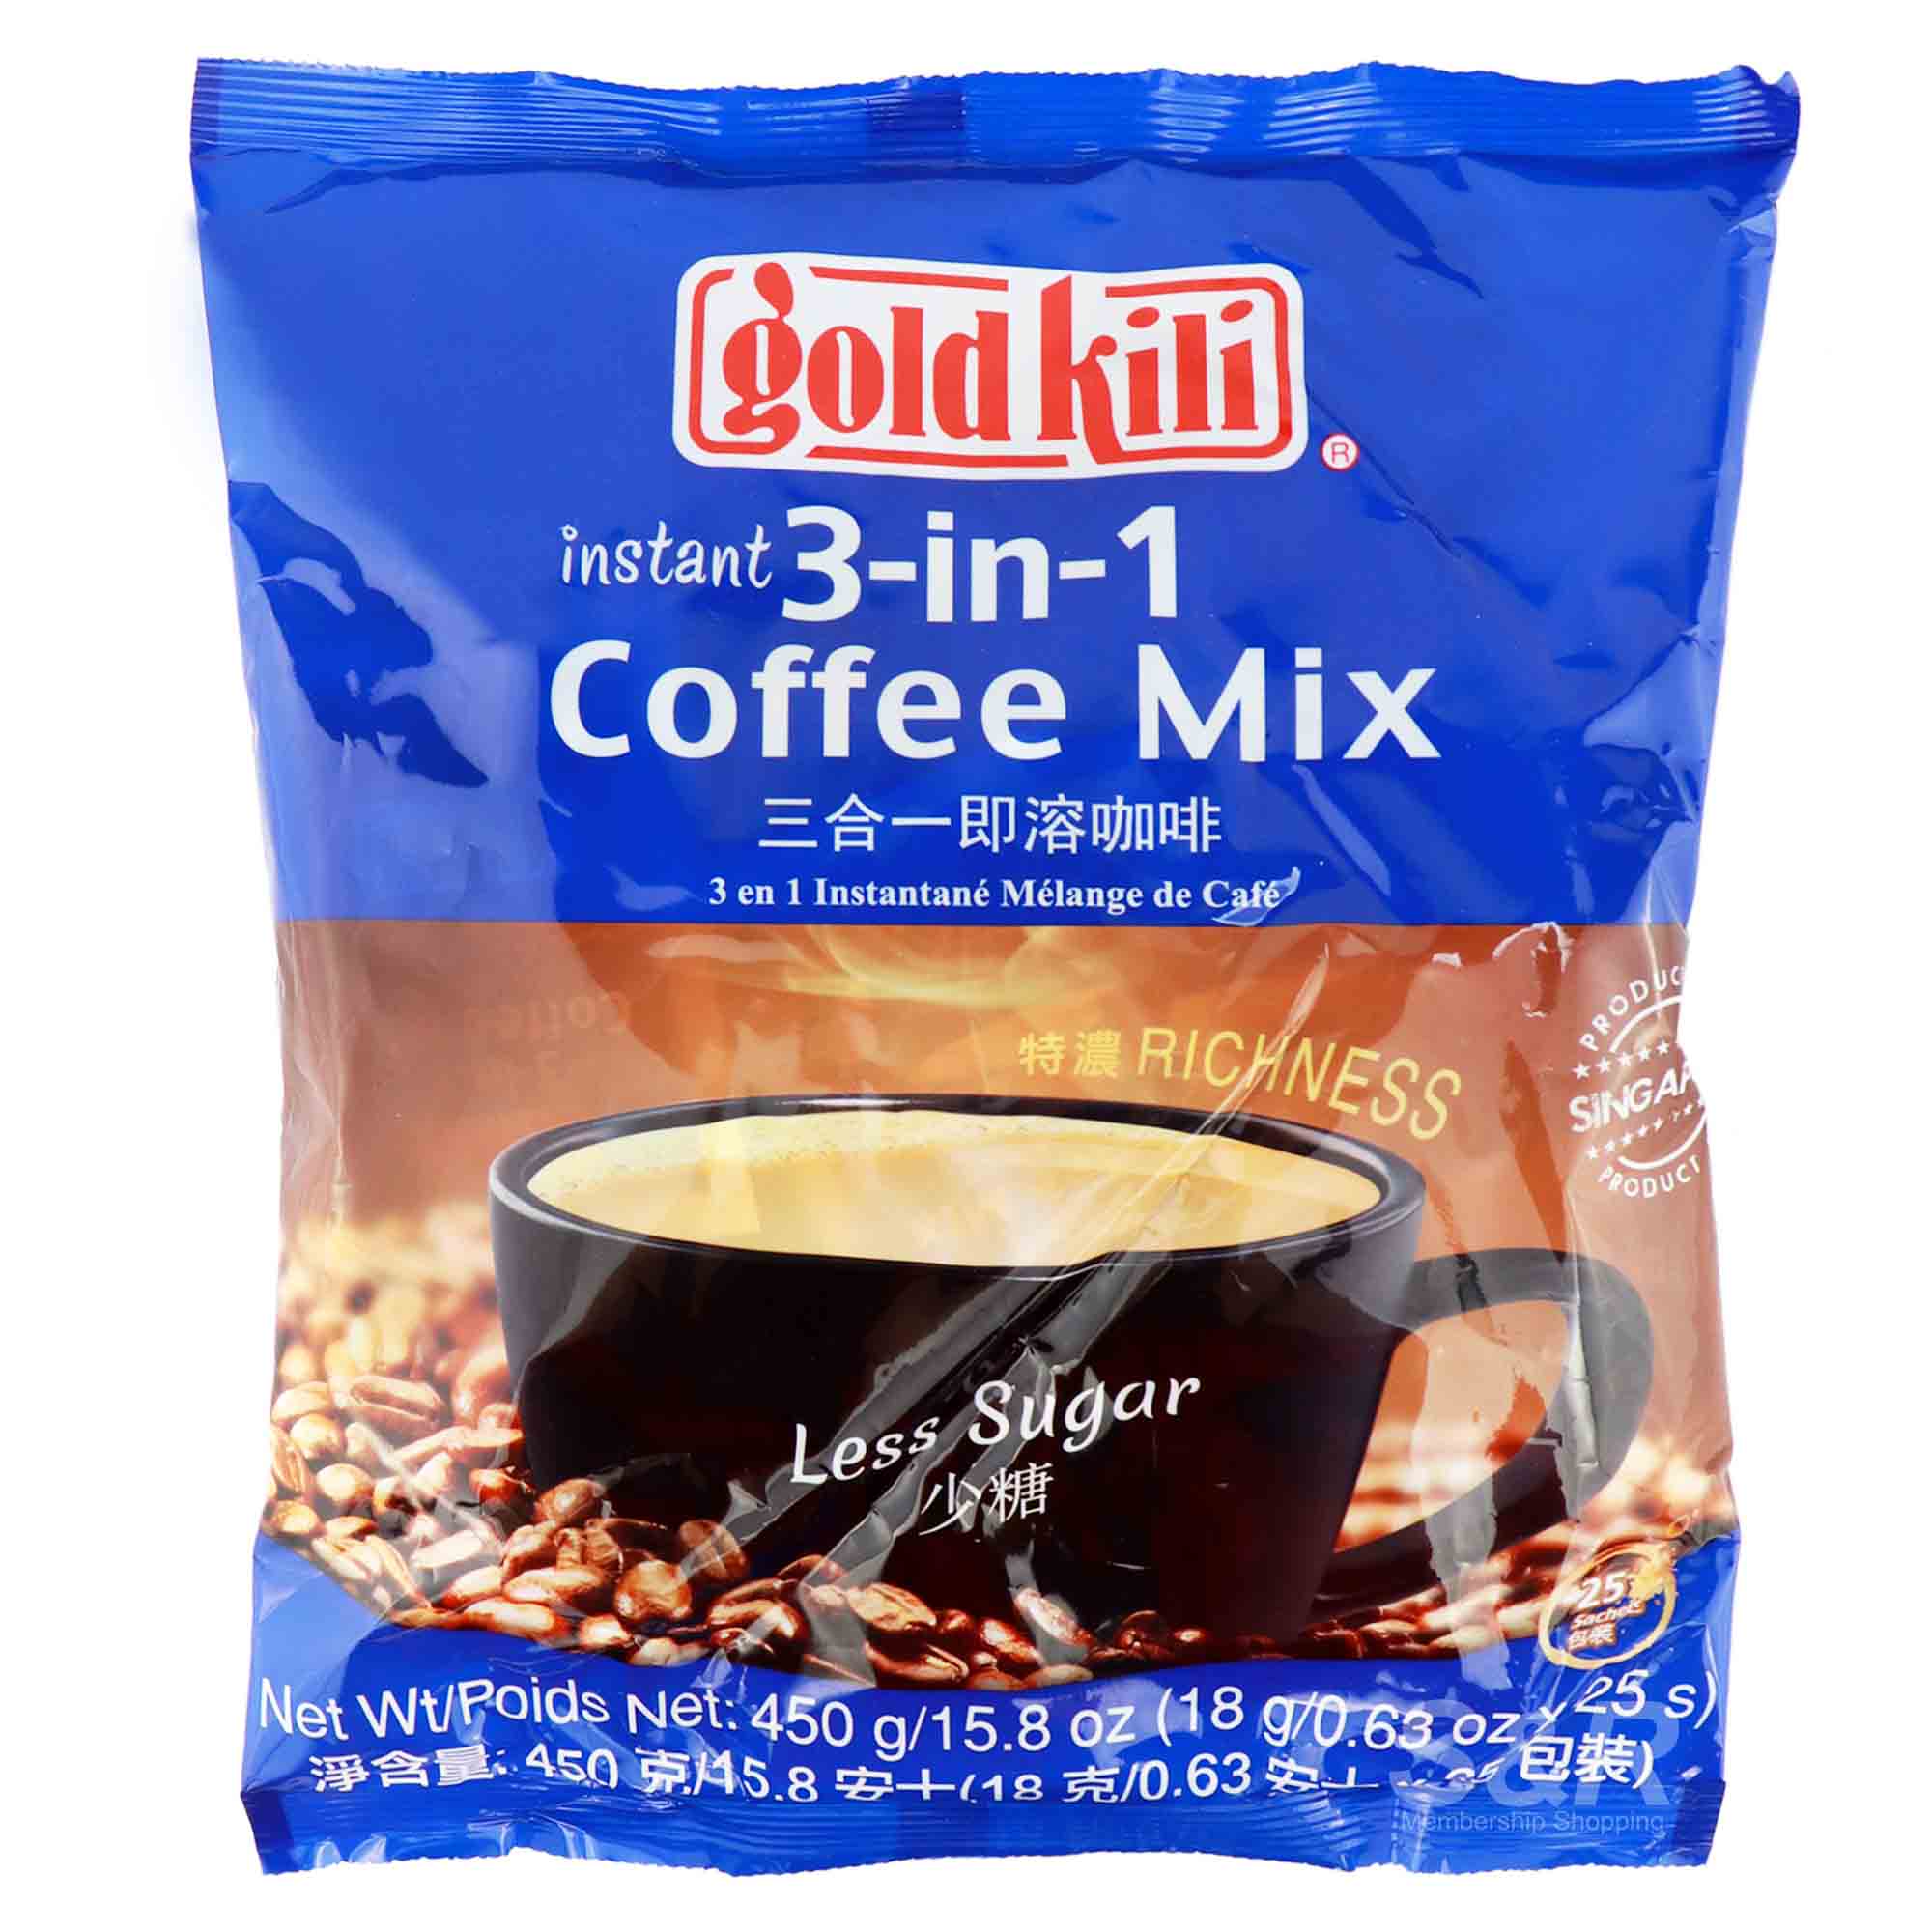 Gold Kili Instant 3-in-1 Less Sugar Coffee Mix 25 sachets